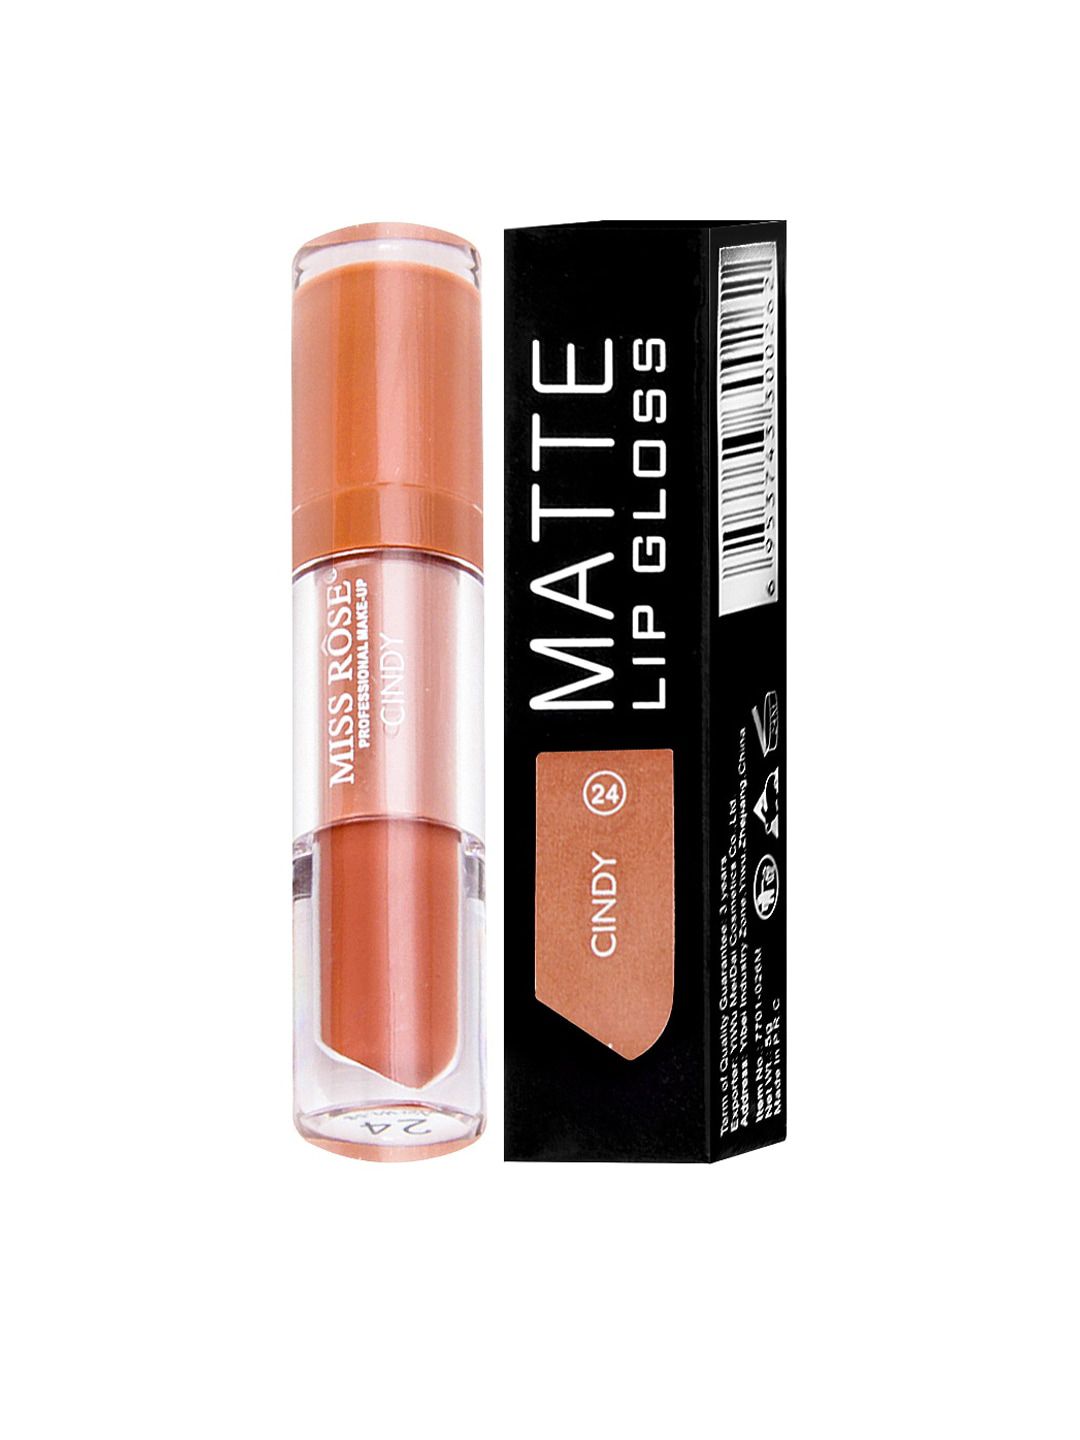 MISS ROSE Matte LipGloss Cindy 7701-026M 24 20 gm Price in India